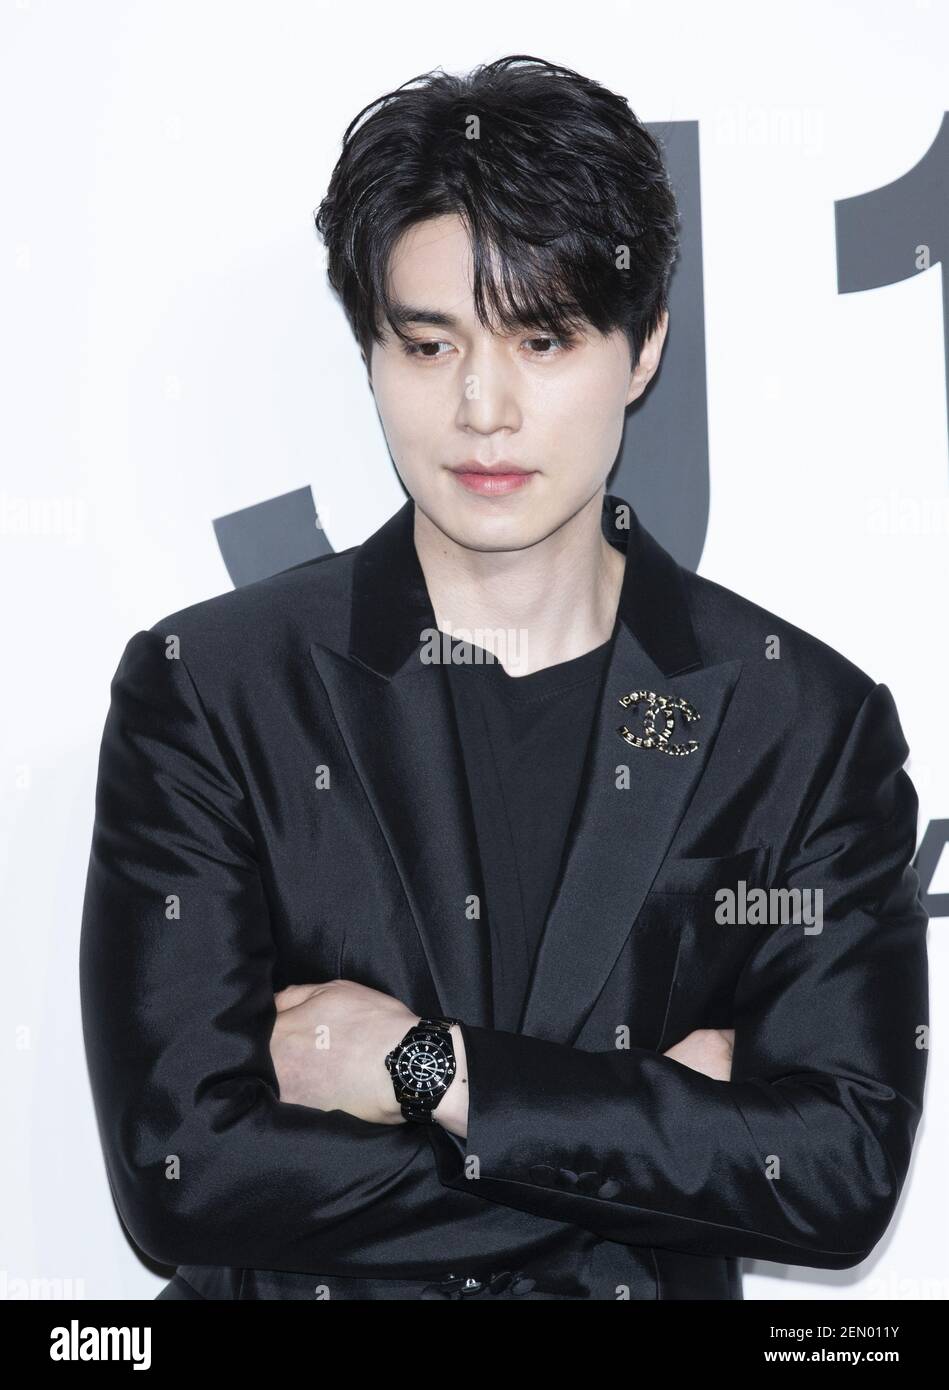 Lee Dong Wook in All Black is the Only Thing We Need to See Today - Koreaboo